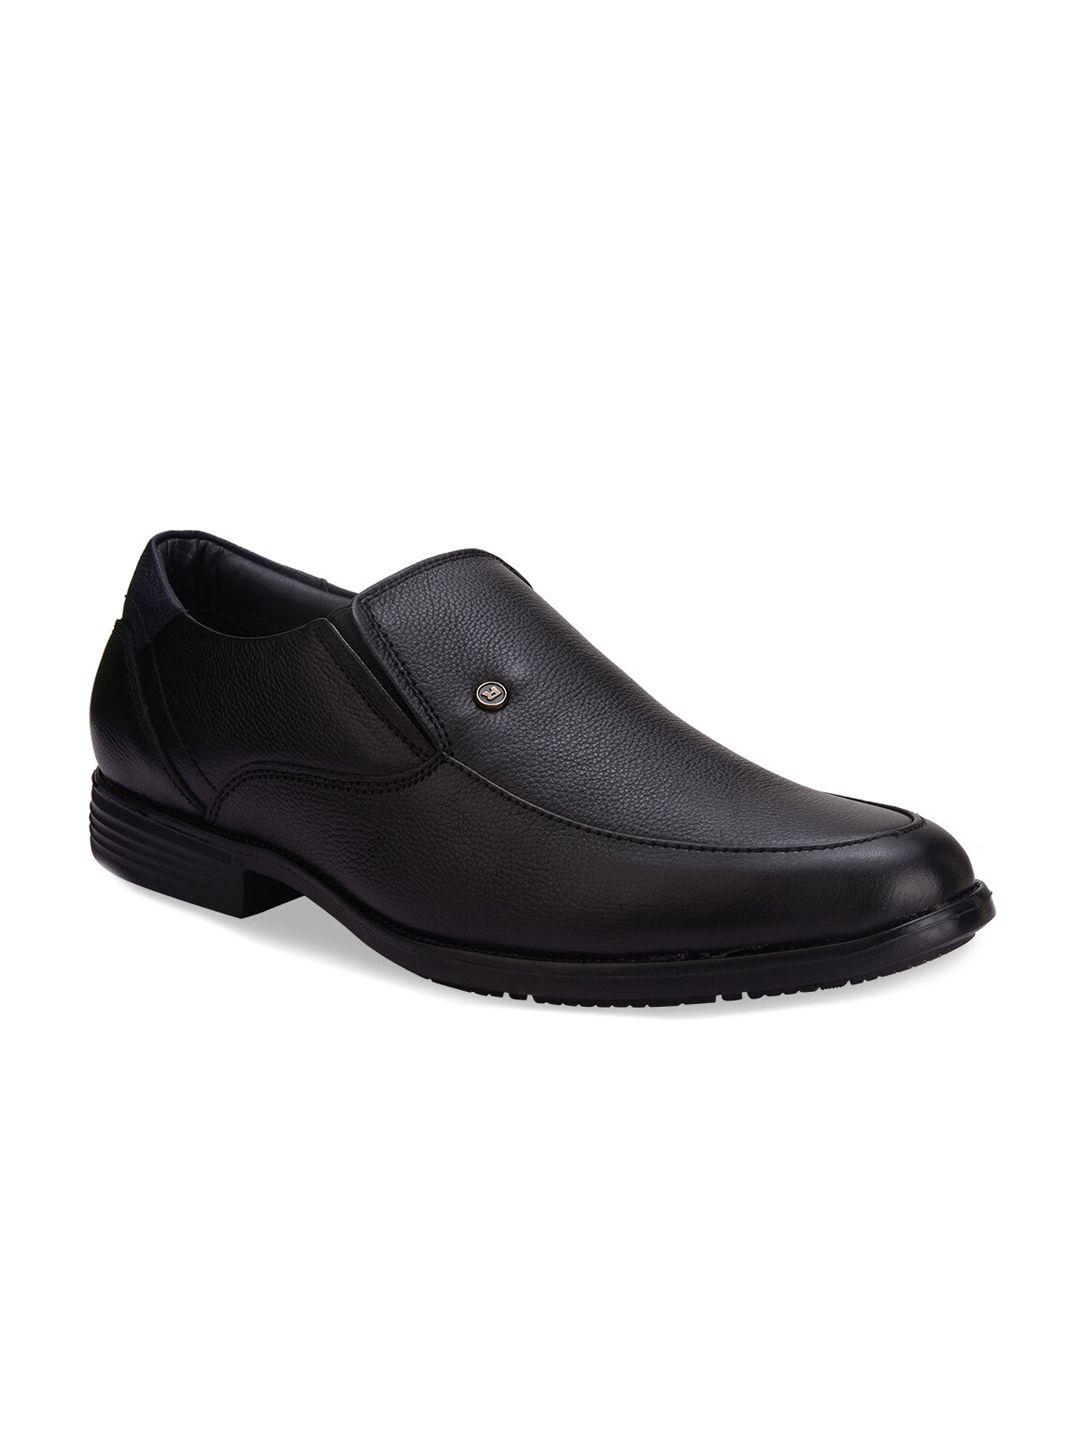 regal-men-textured-pure-leather-formal-slip-on-shoes